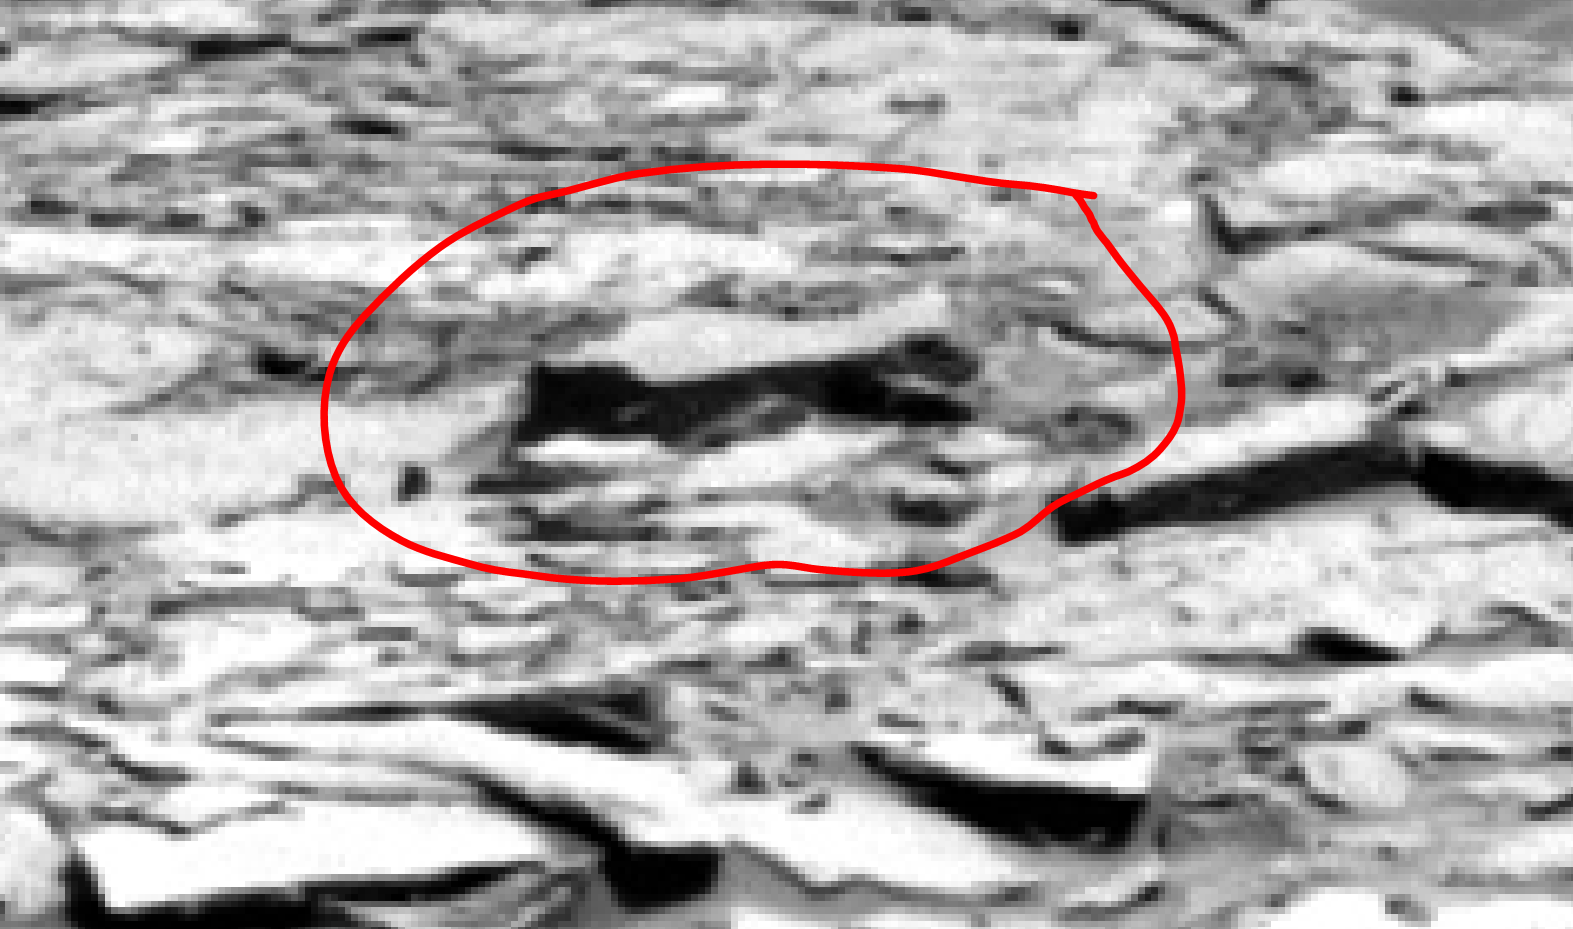 mars sol 1342 anomaly-artifacts 6a was life on mars